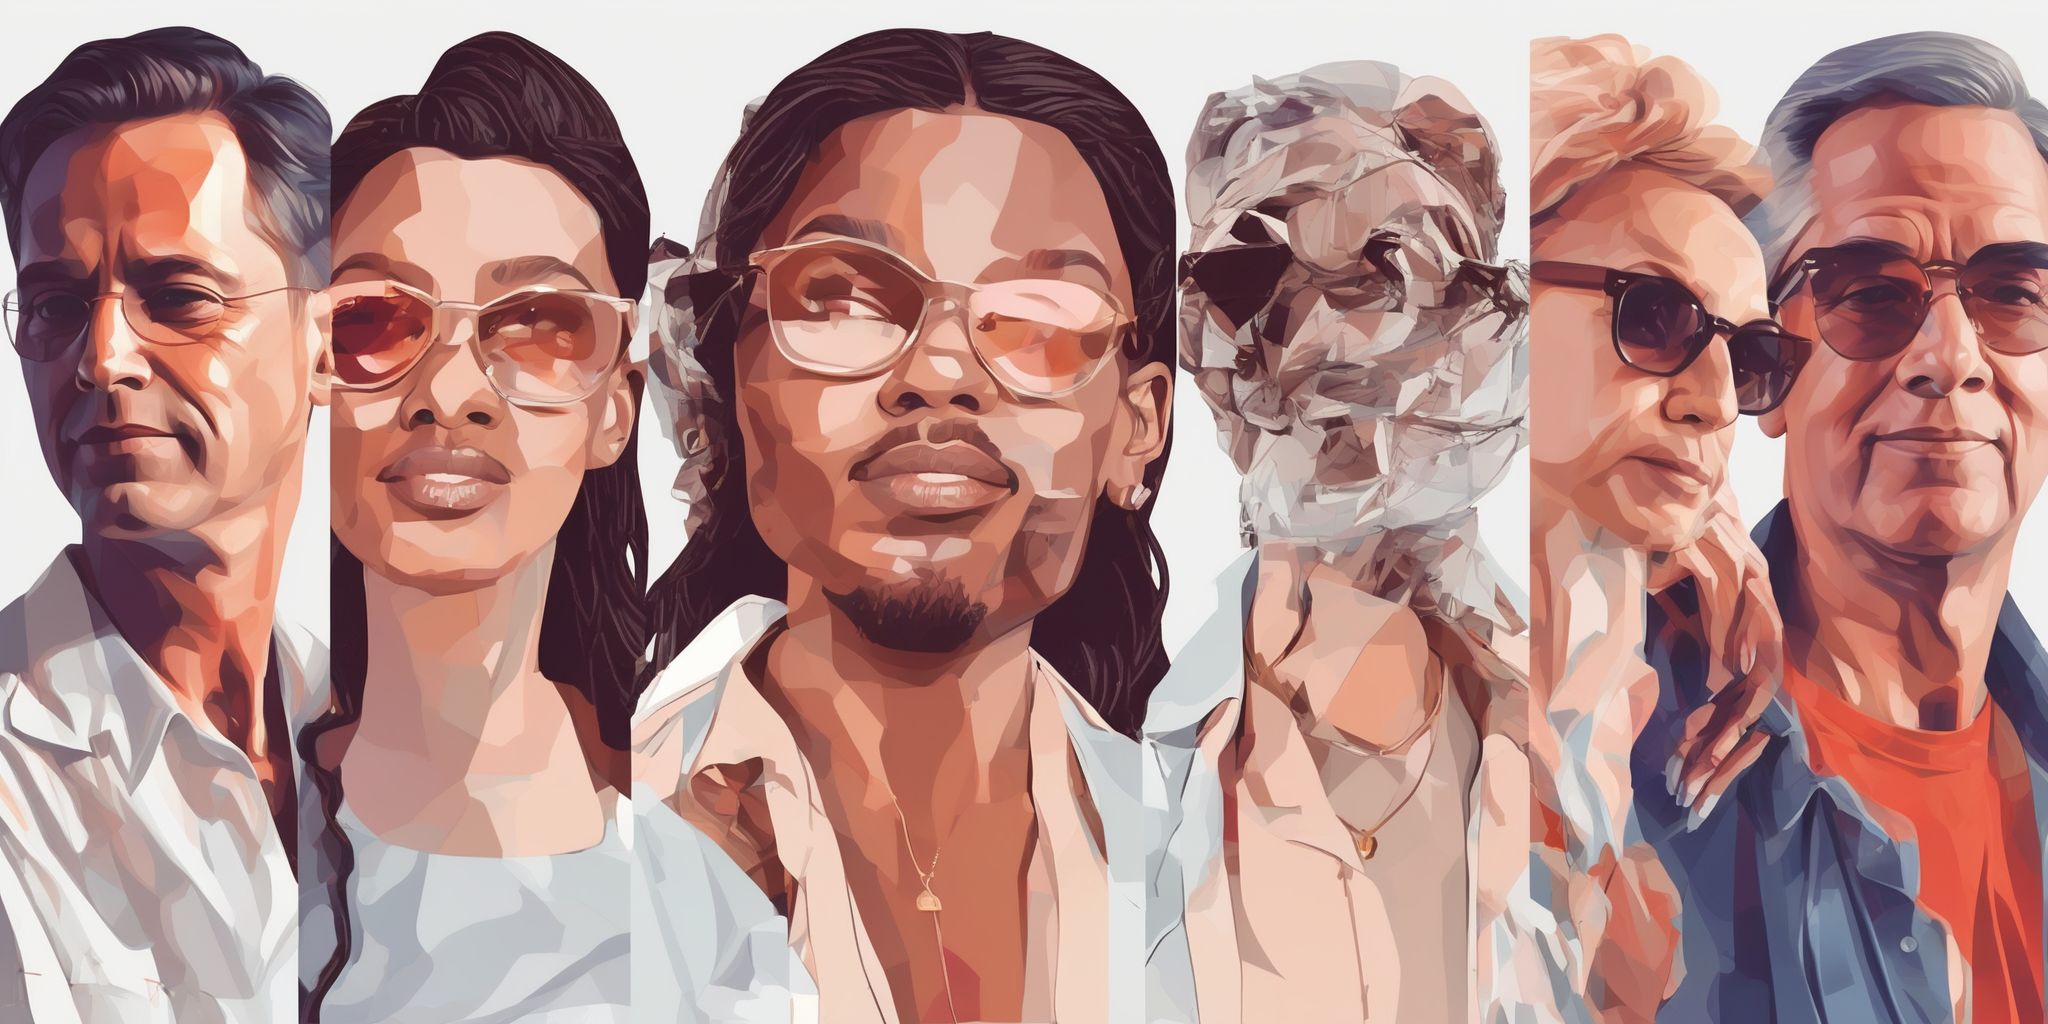 Celebrities in illustration style with gradients and white background